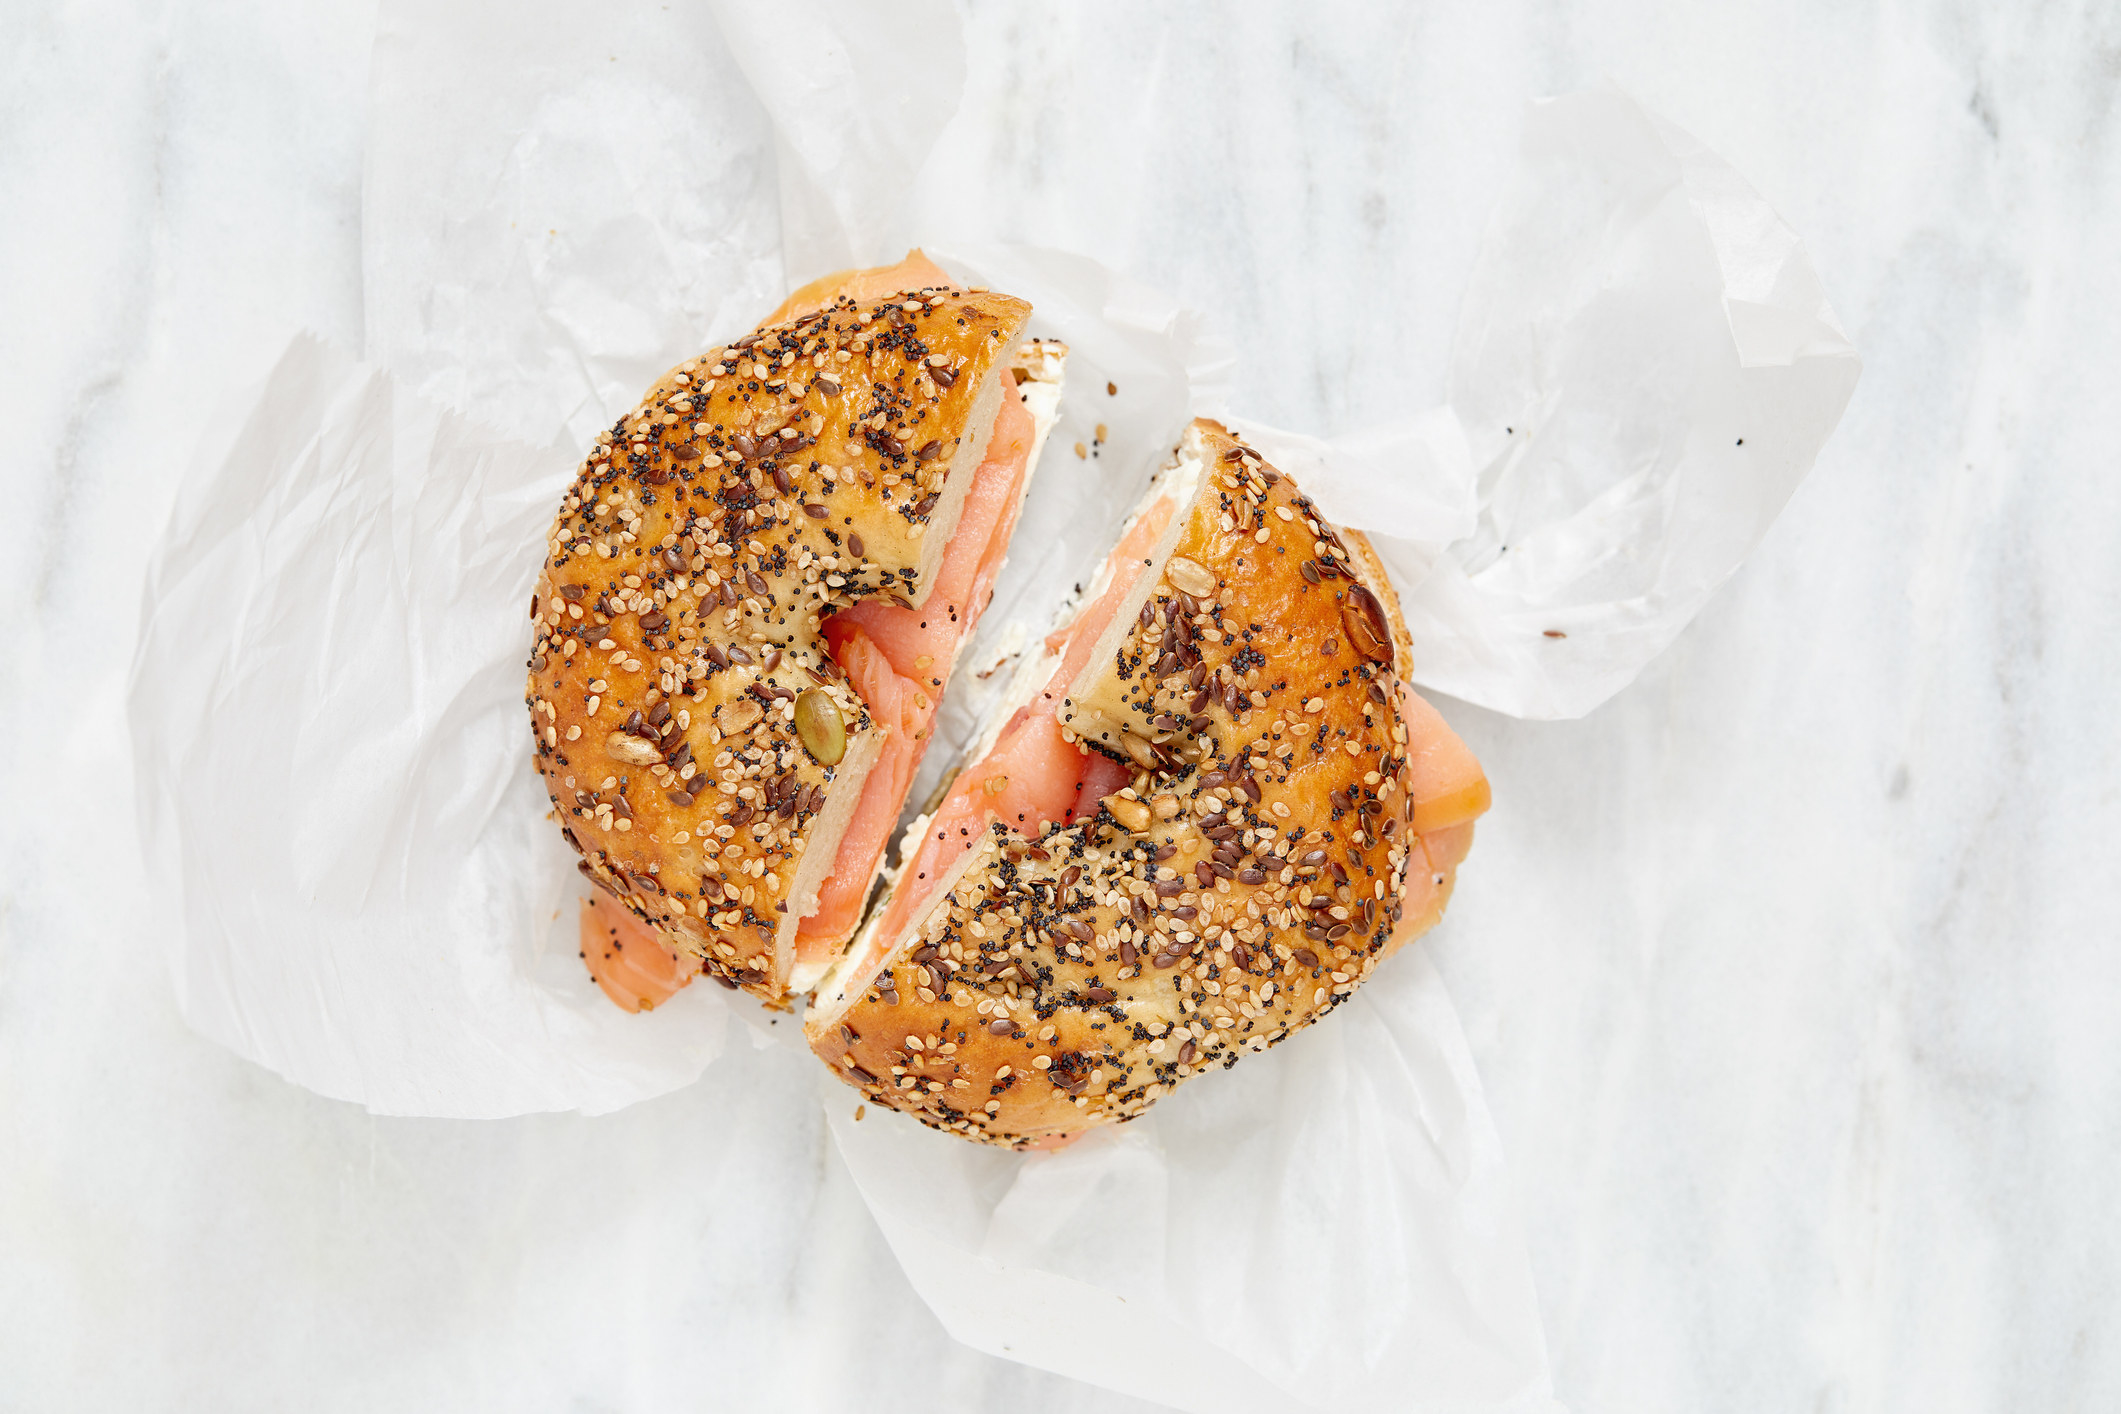 An everything bagel with tomato.